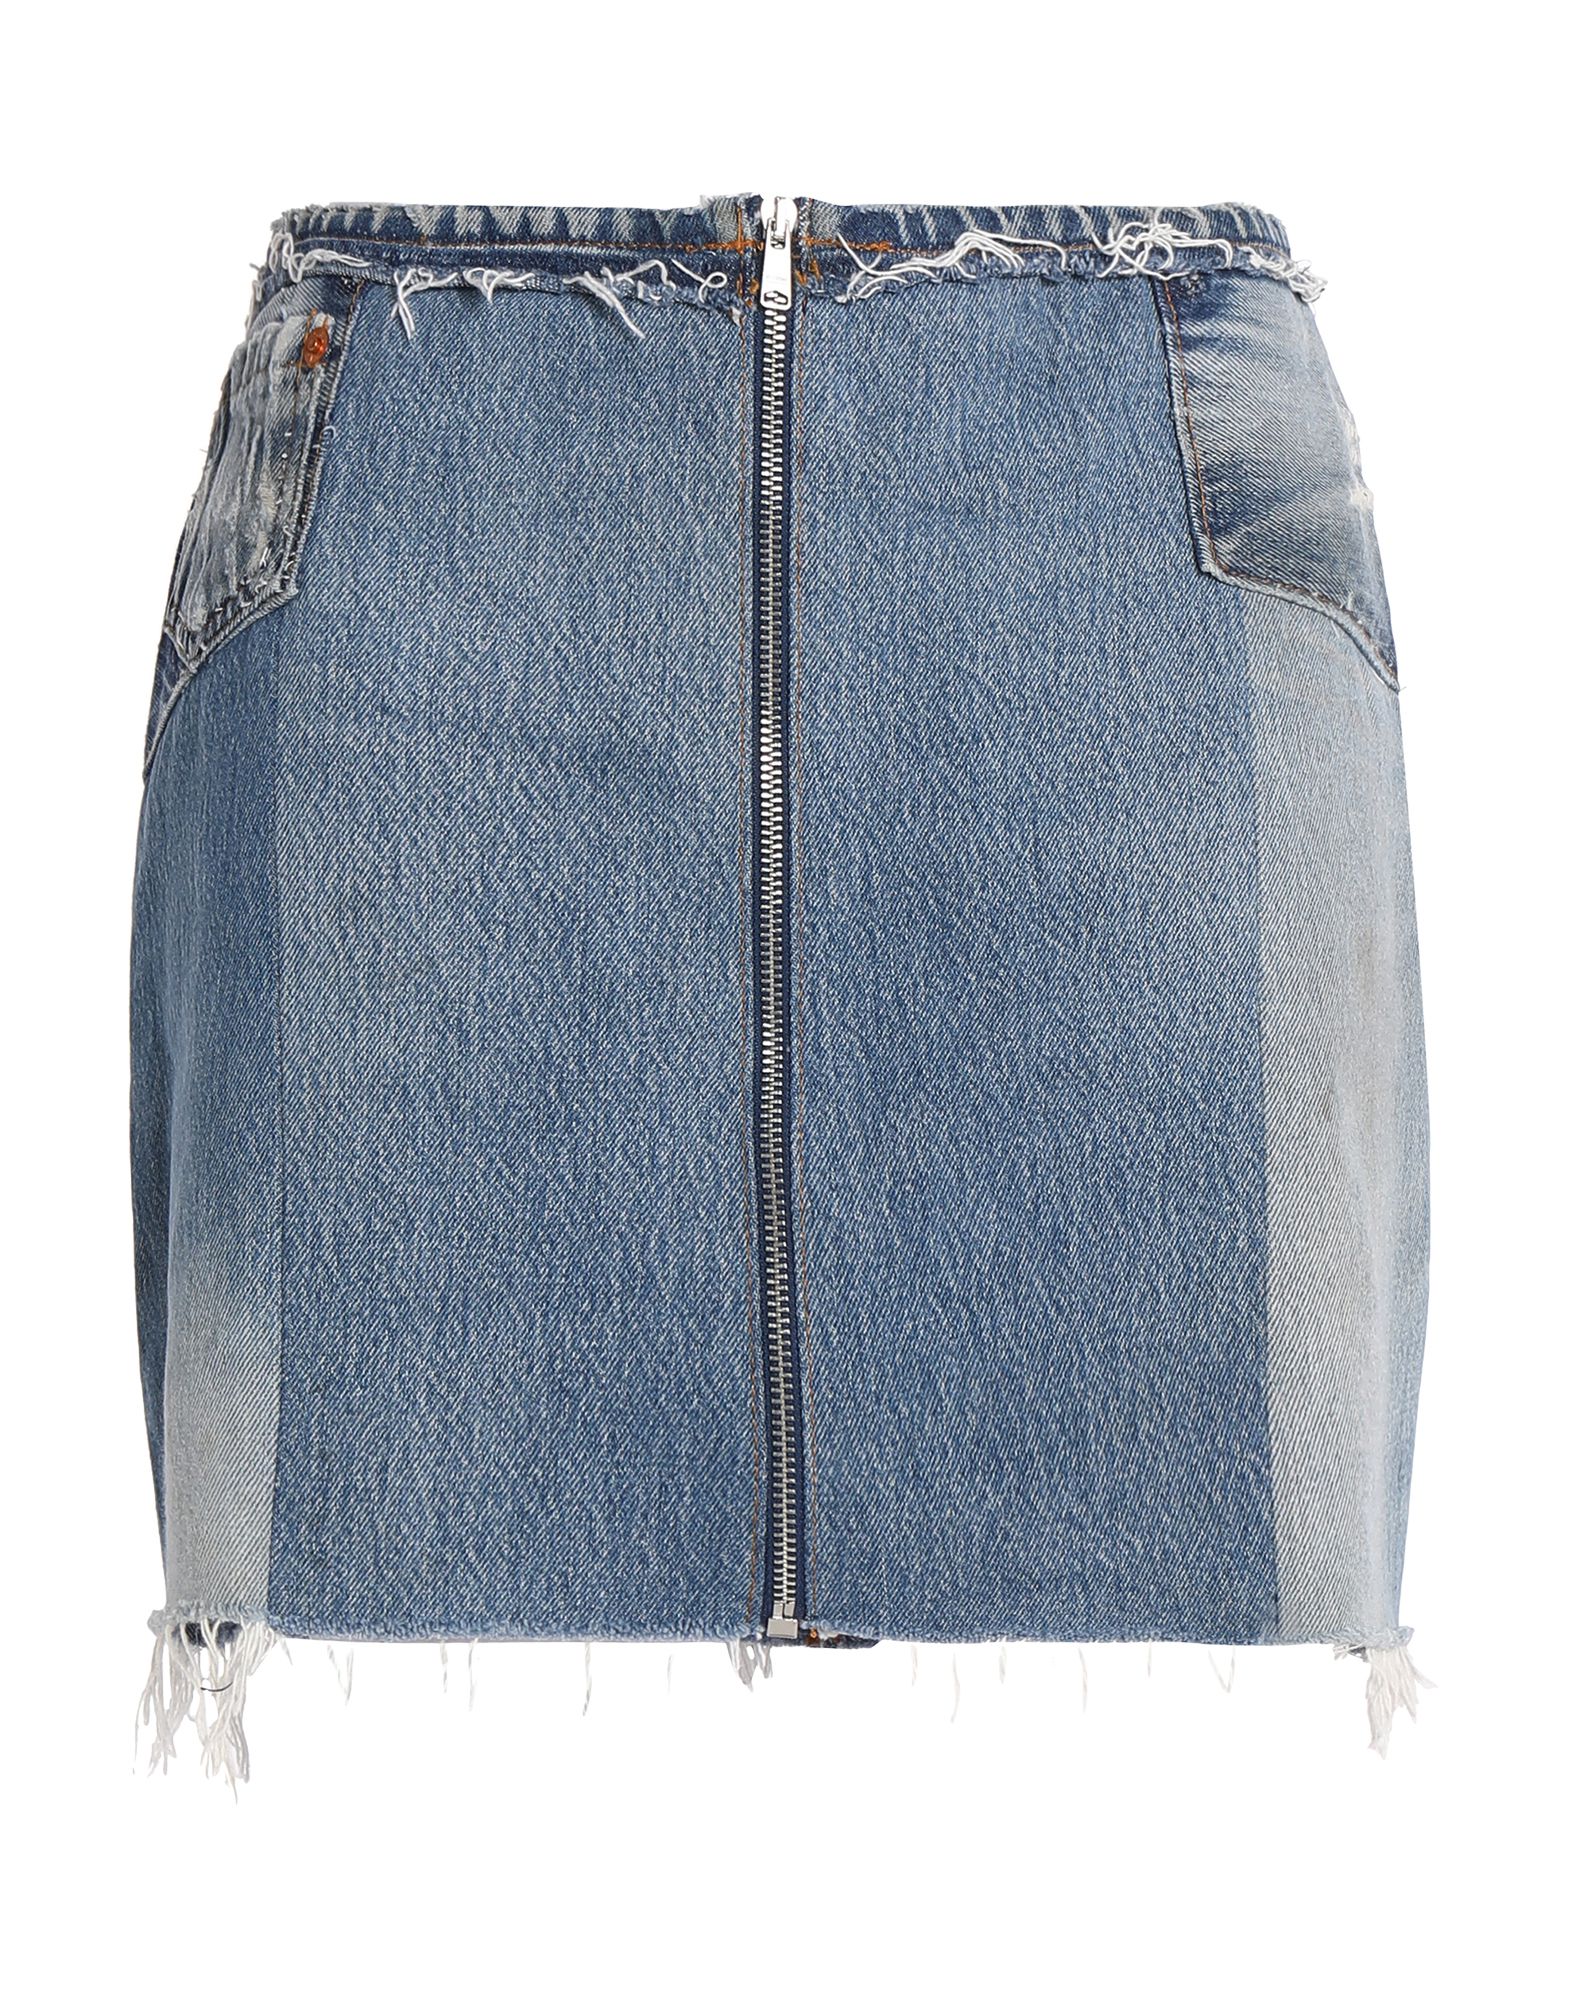 RE/DONE BY LEVI'S DENIM SKIRTS,42743066PW 1